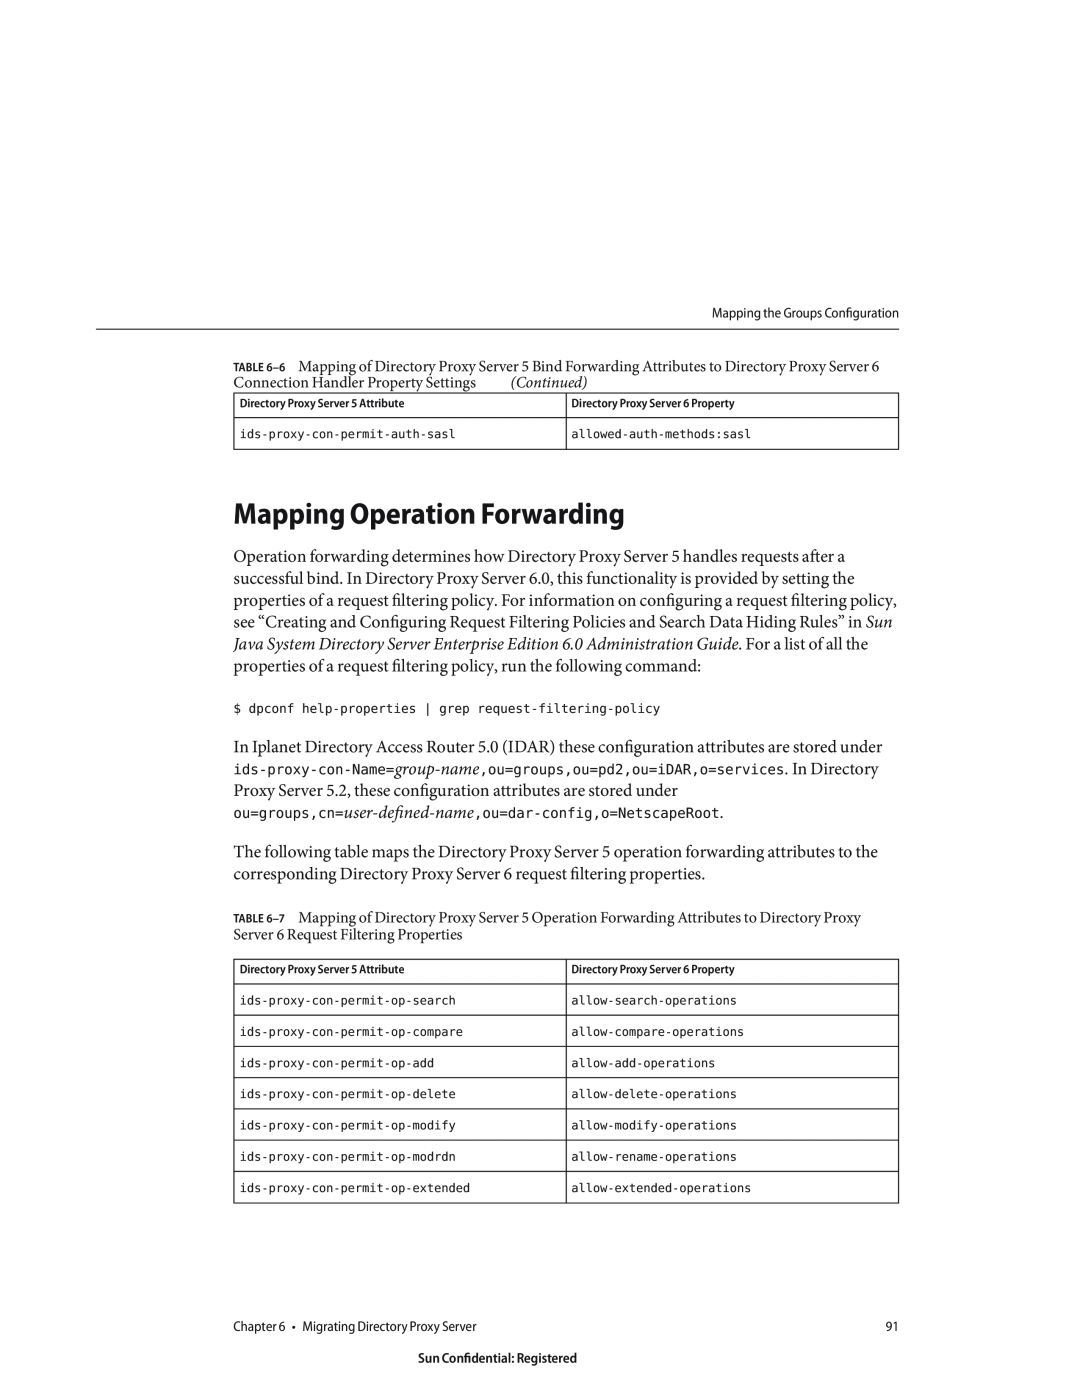 Sun Microsystems 8190994 manual Mapping Operation Forwarding, Connection Handler Property Settings 